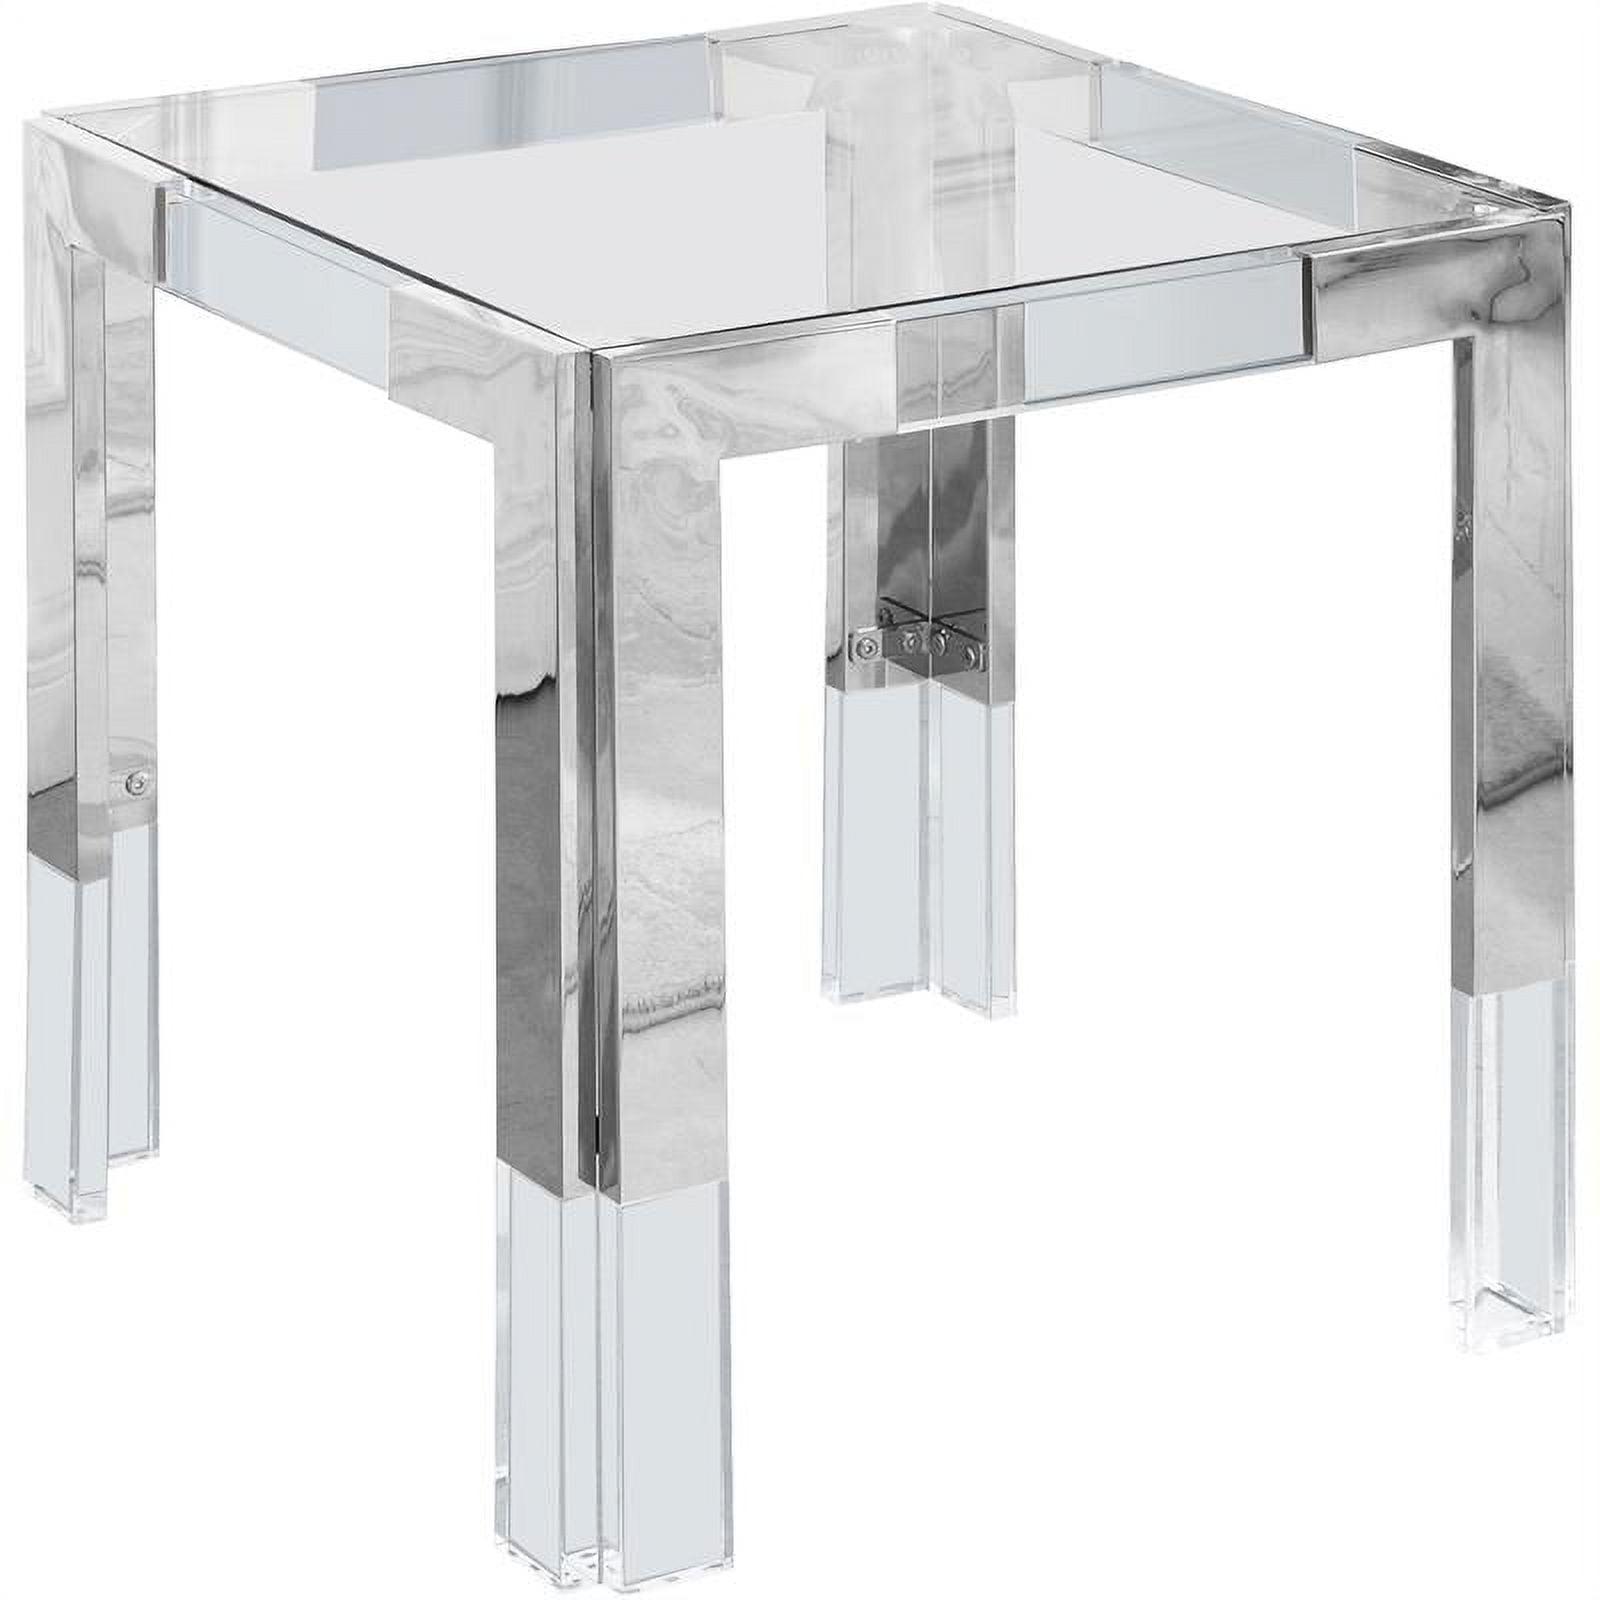 Casper Chrome Square Glass-Top End Table with Stainless Steel Accents